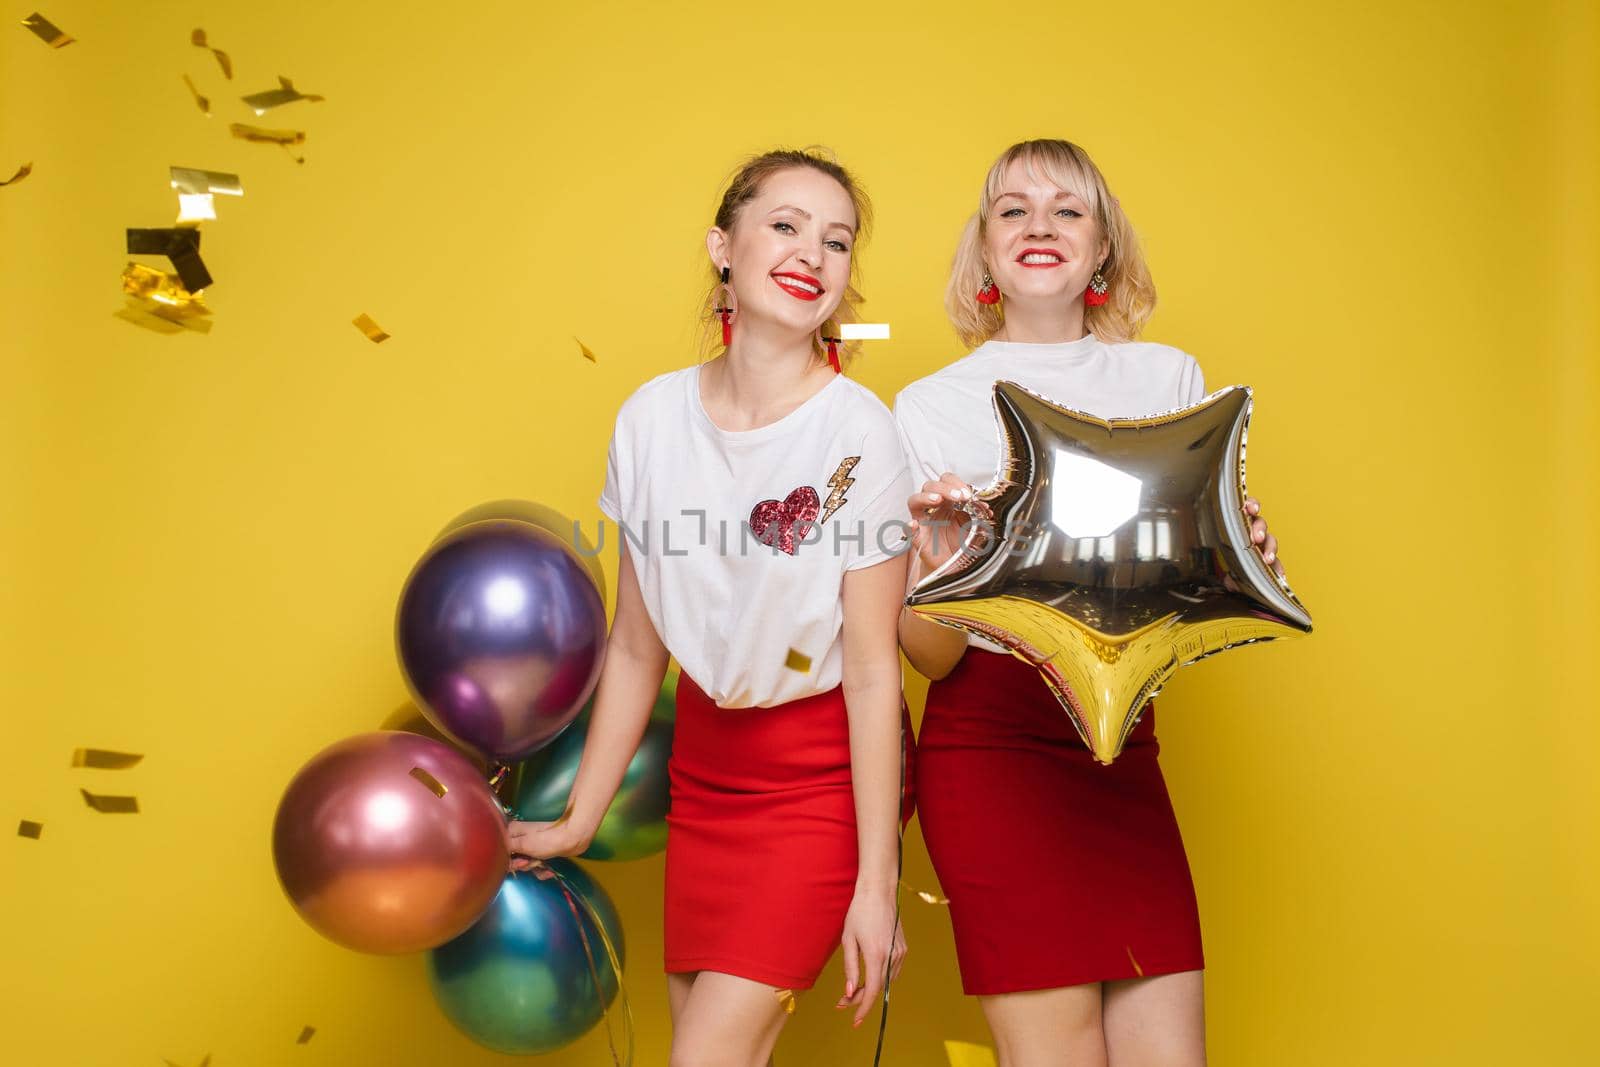 Two happy beautiful woman friend celebrating posing surrounded by colorful air balloon confetti. Attractive smiling female wearing bright clothes enjoying party isolated at yellow studio background